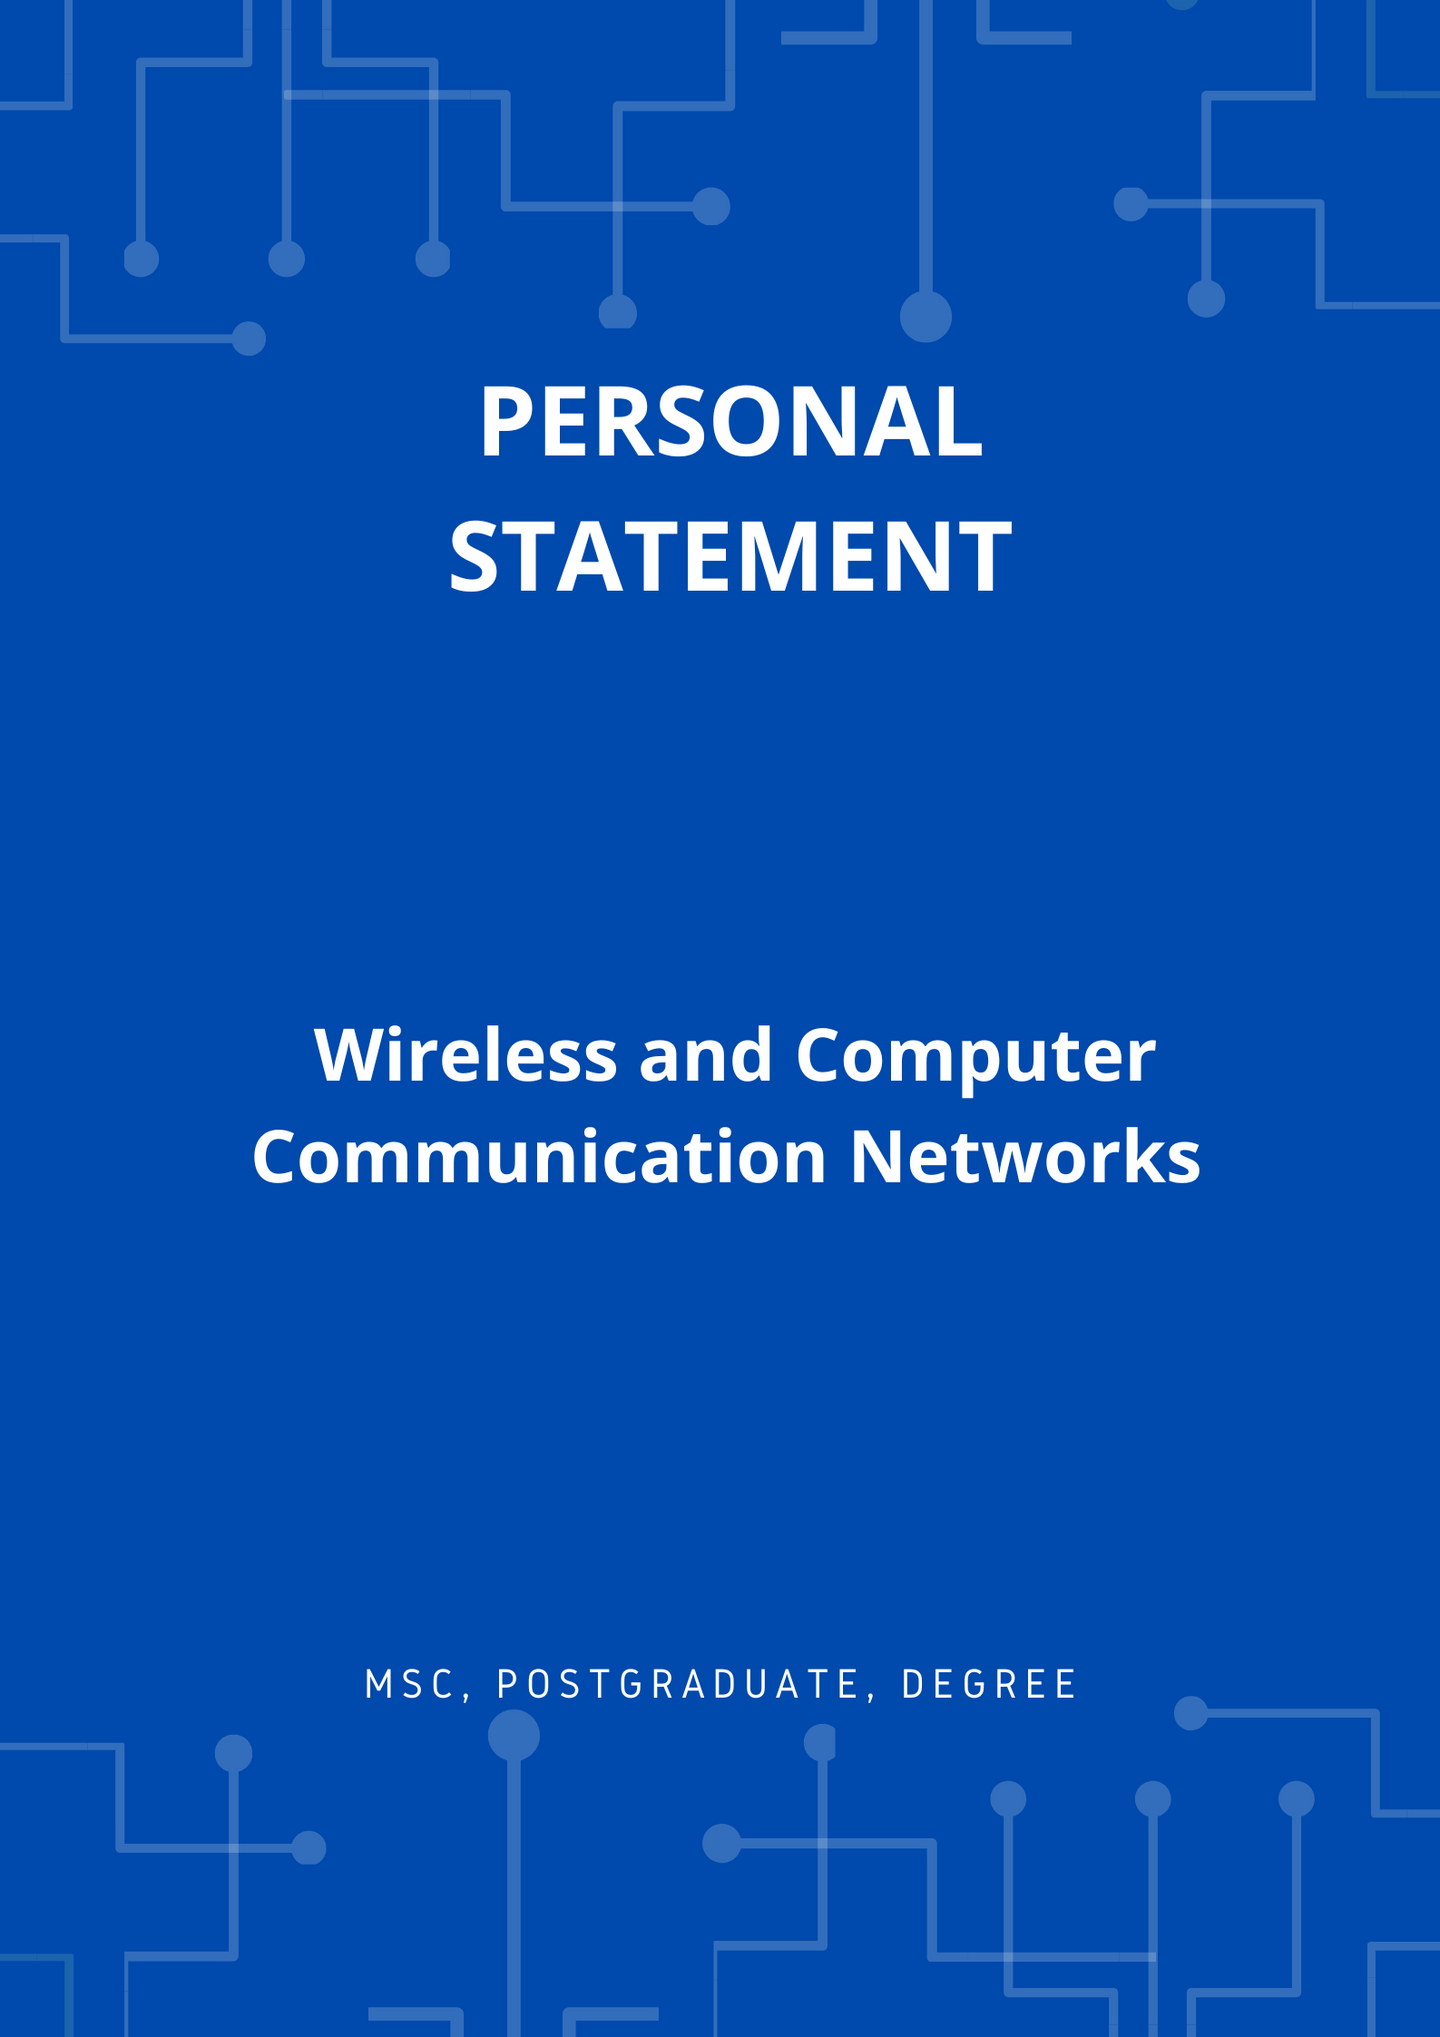 Wireless and Computer Communication Networks MSc Personal Statement